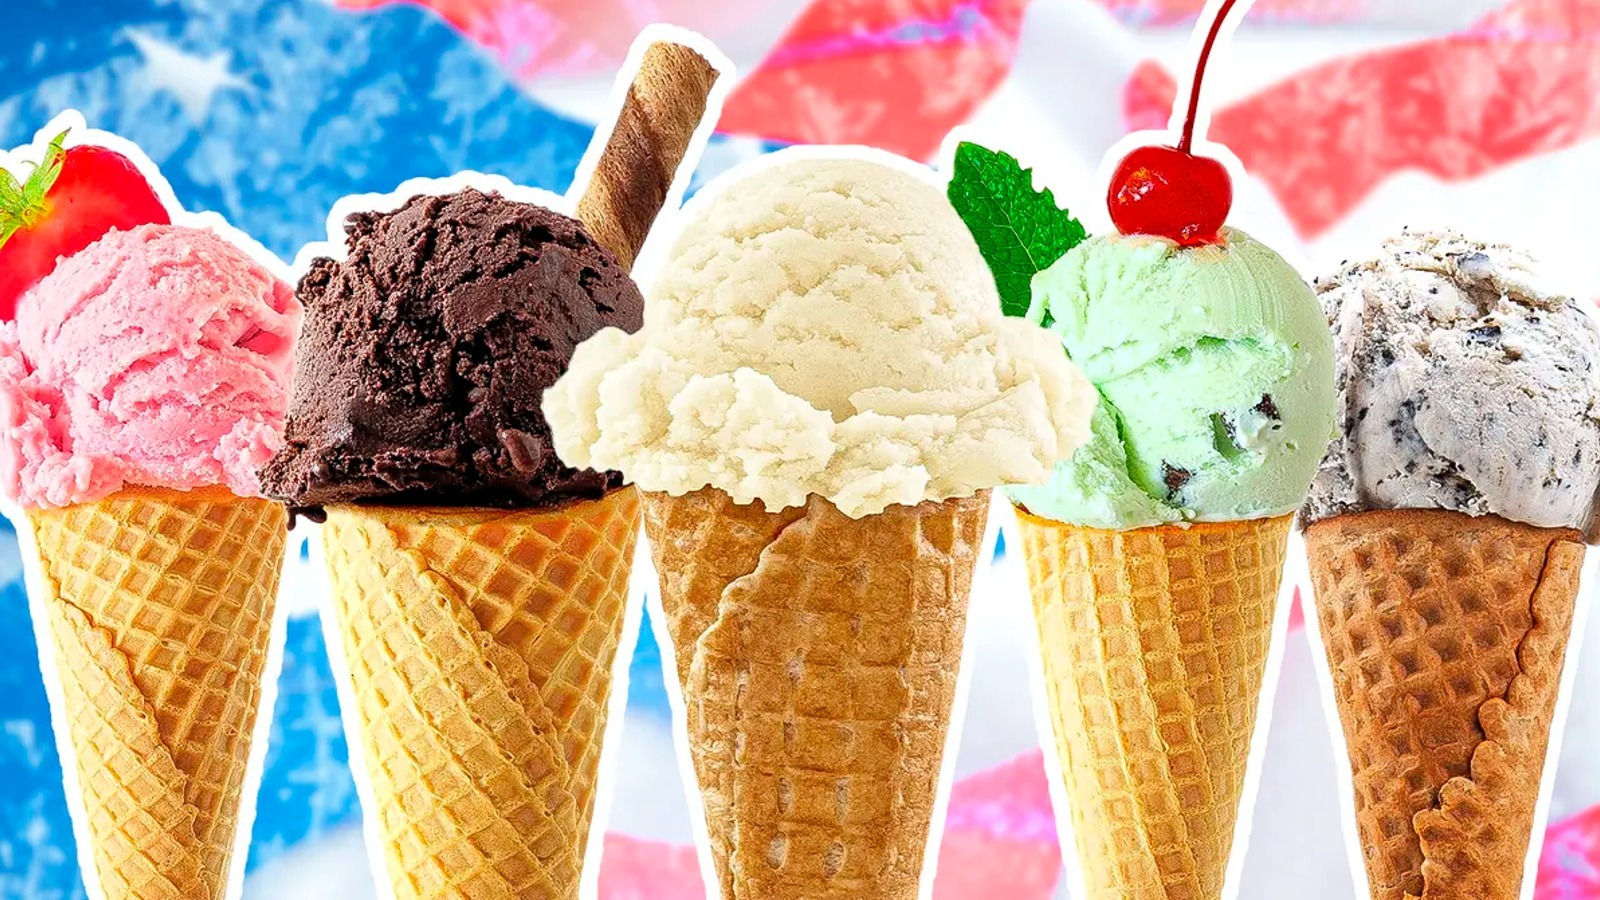 14 Most Popular Ice Cream Flavors In The US And Where They Came From